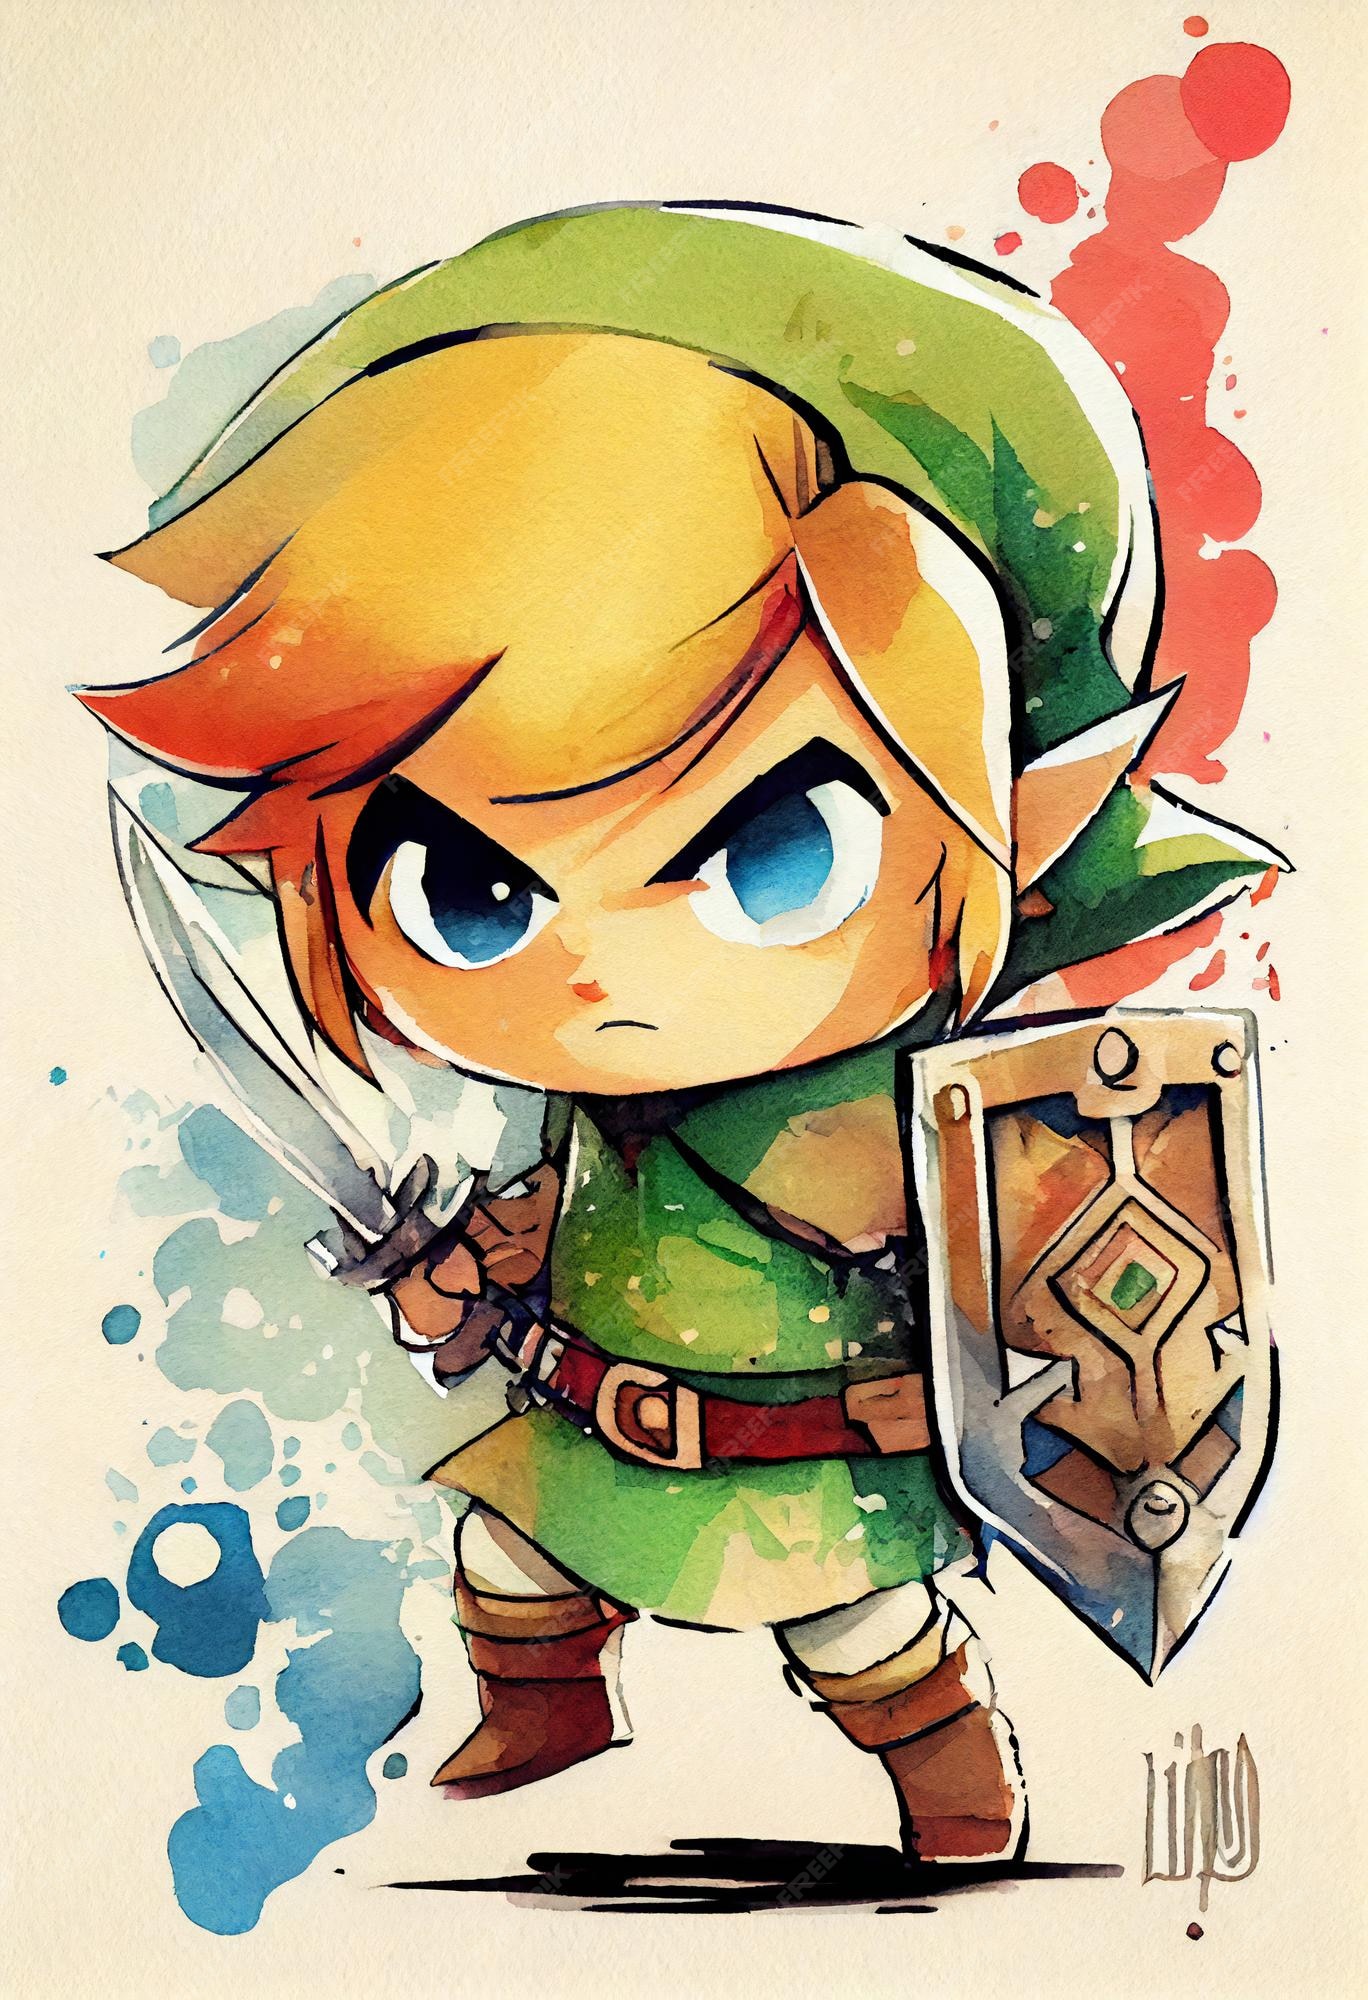 aslook jin recommends pictures of link from zelda pic